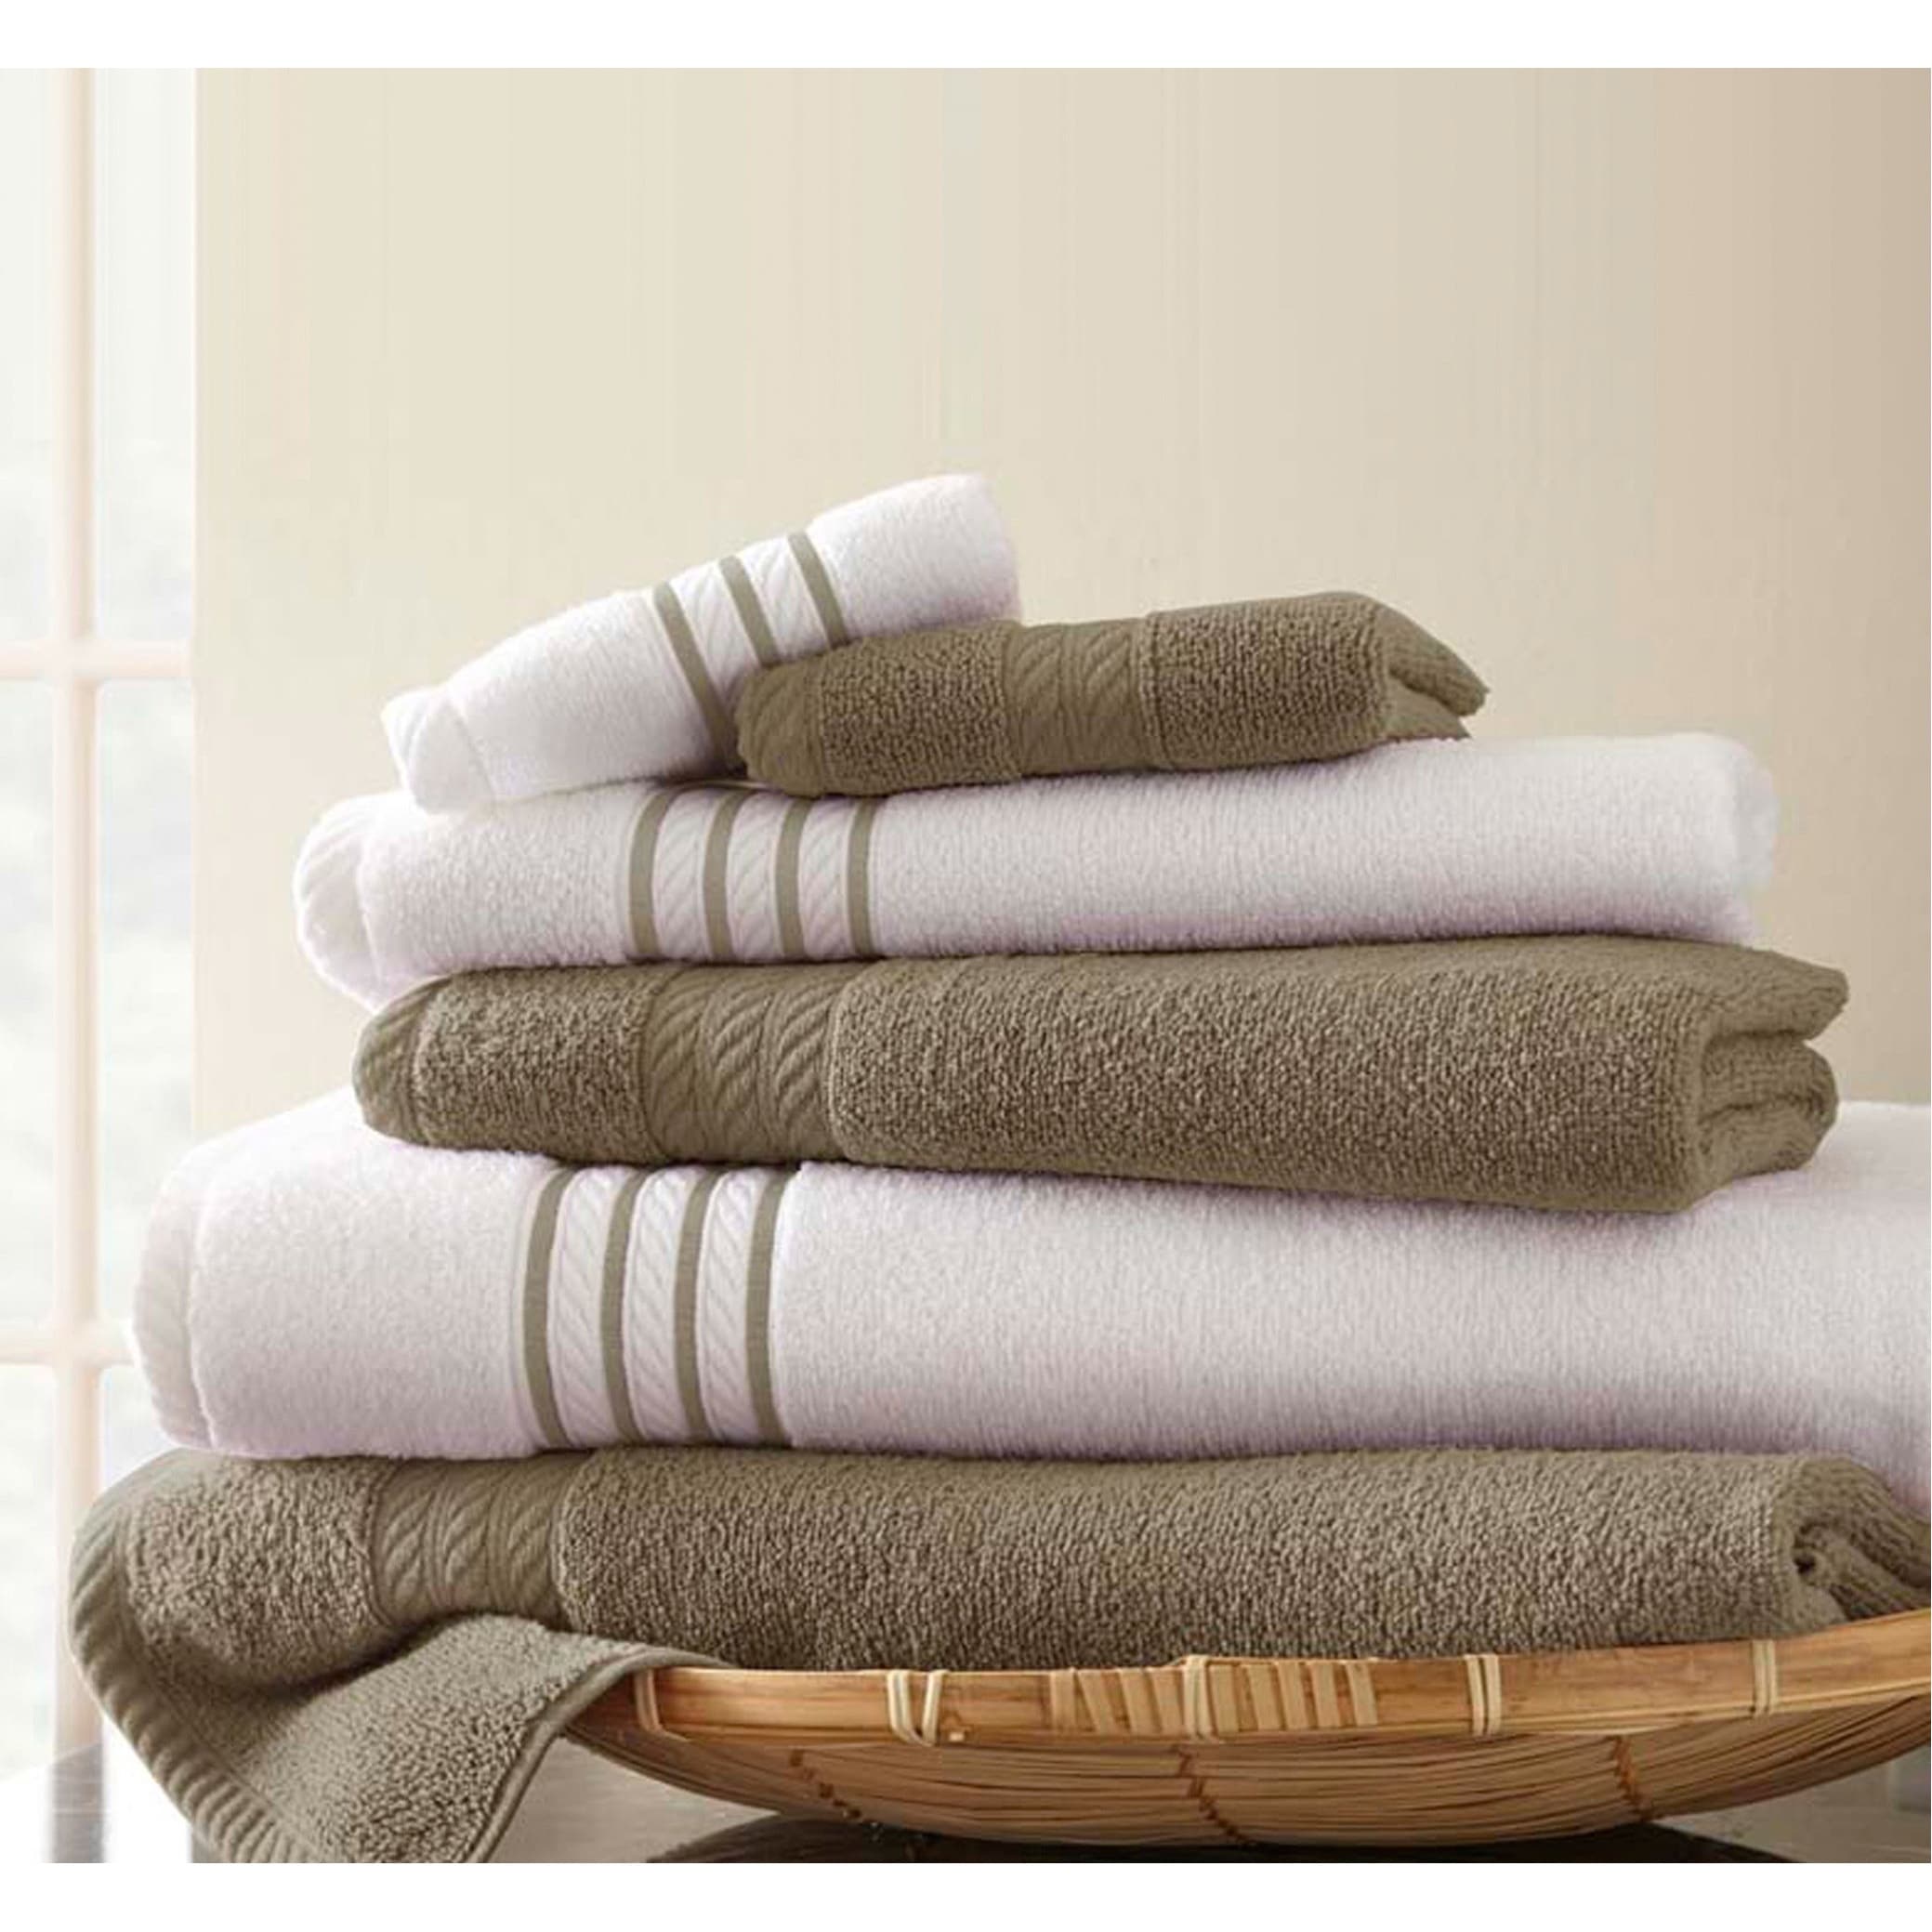 https://ak1.ostkcdn.com/images/products/is/images/direct/4e9f9ec729a4b9fa6f522f54f32bee70b3056ea8/Modern-Threads-Quick-Dry-Stripe-6-piece-Towel-Set.jpg